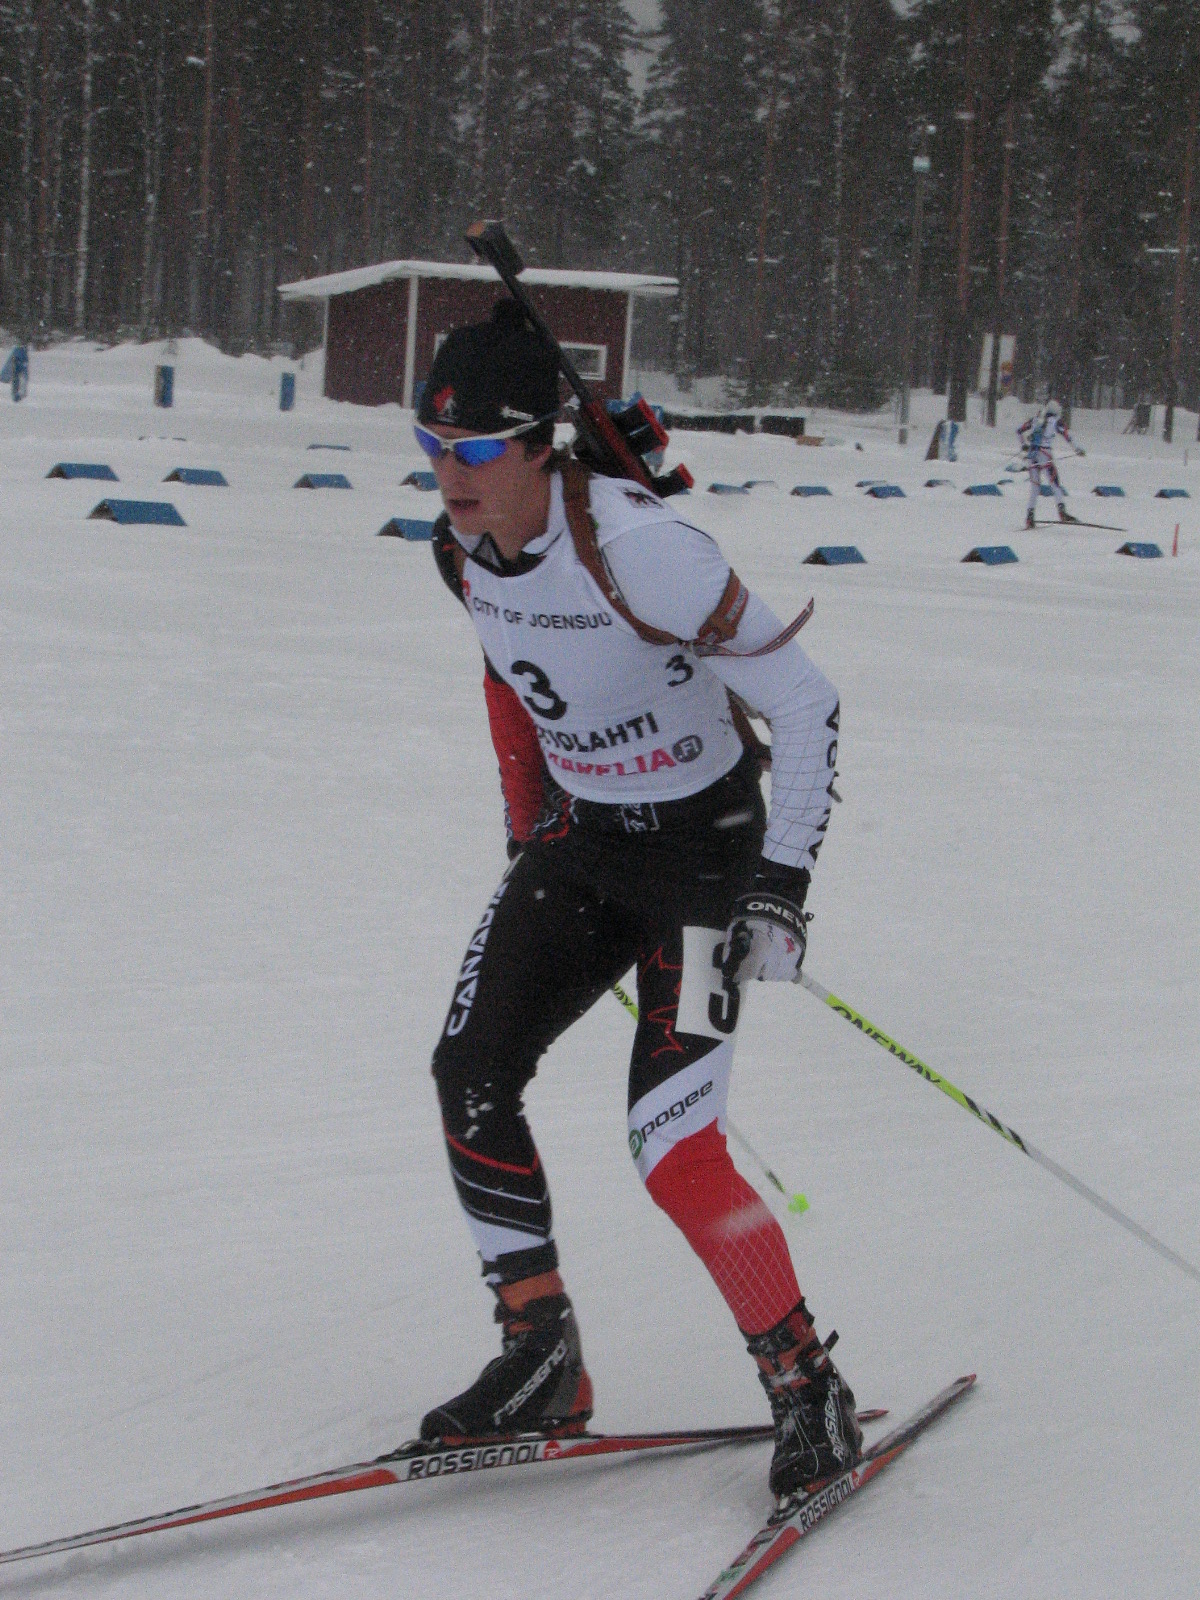 Behind Wenzel’s Victory, Canadians Place Two More in Top 20 at World Junior Biathlon Championships